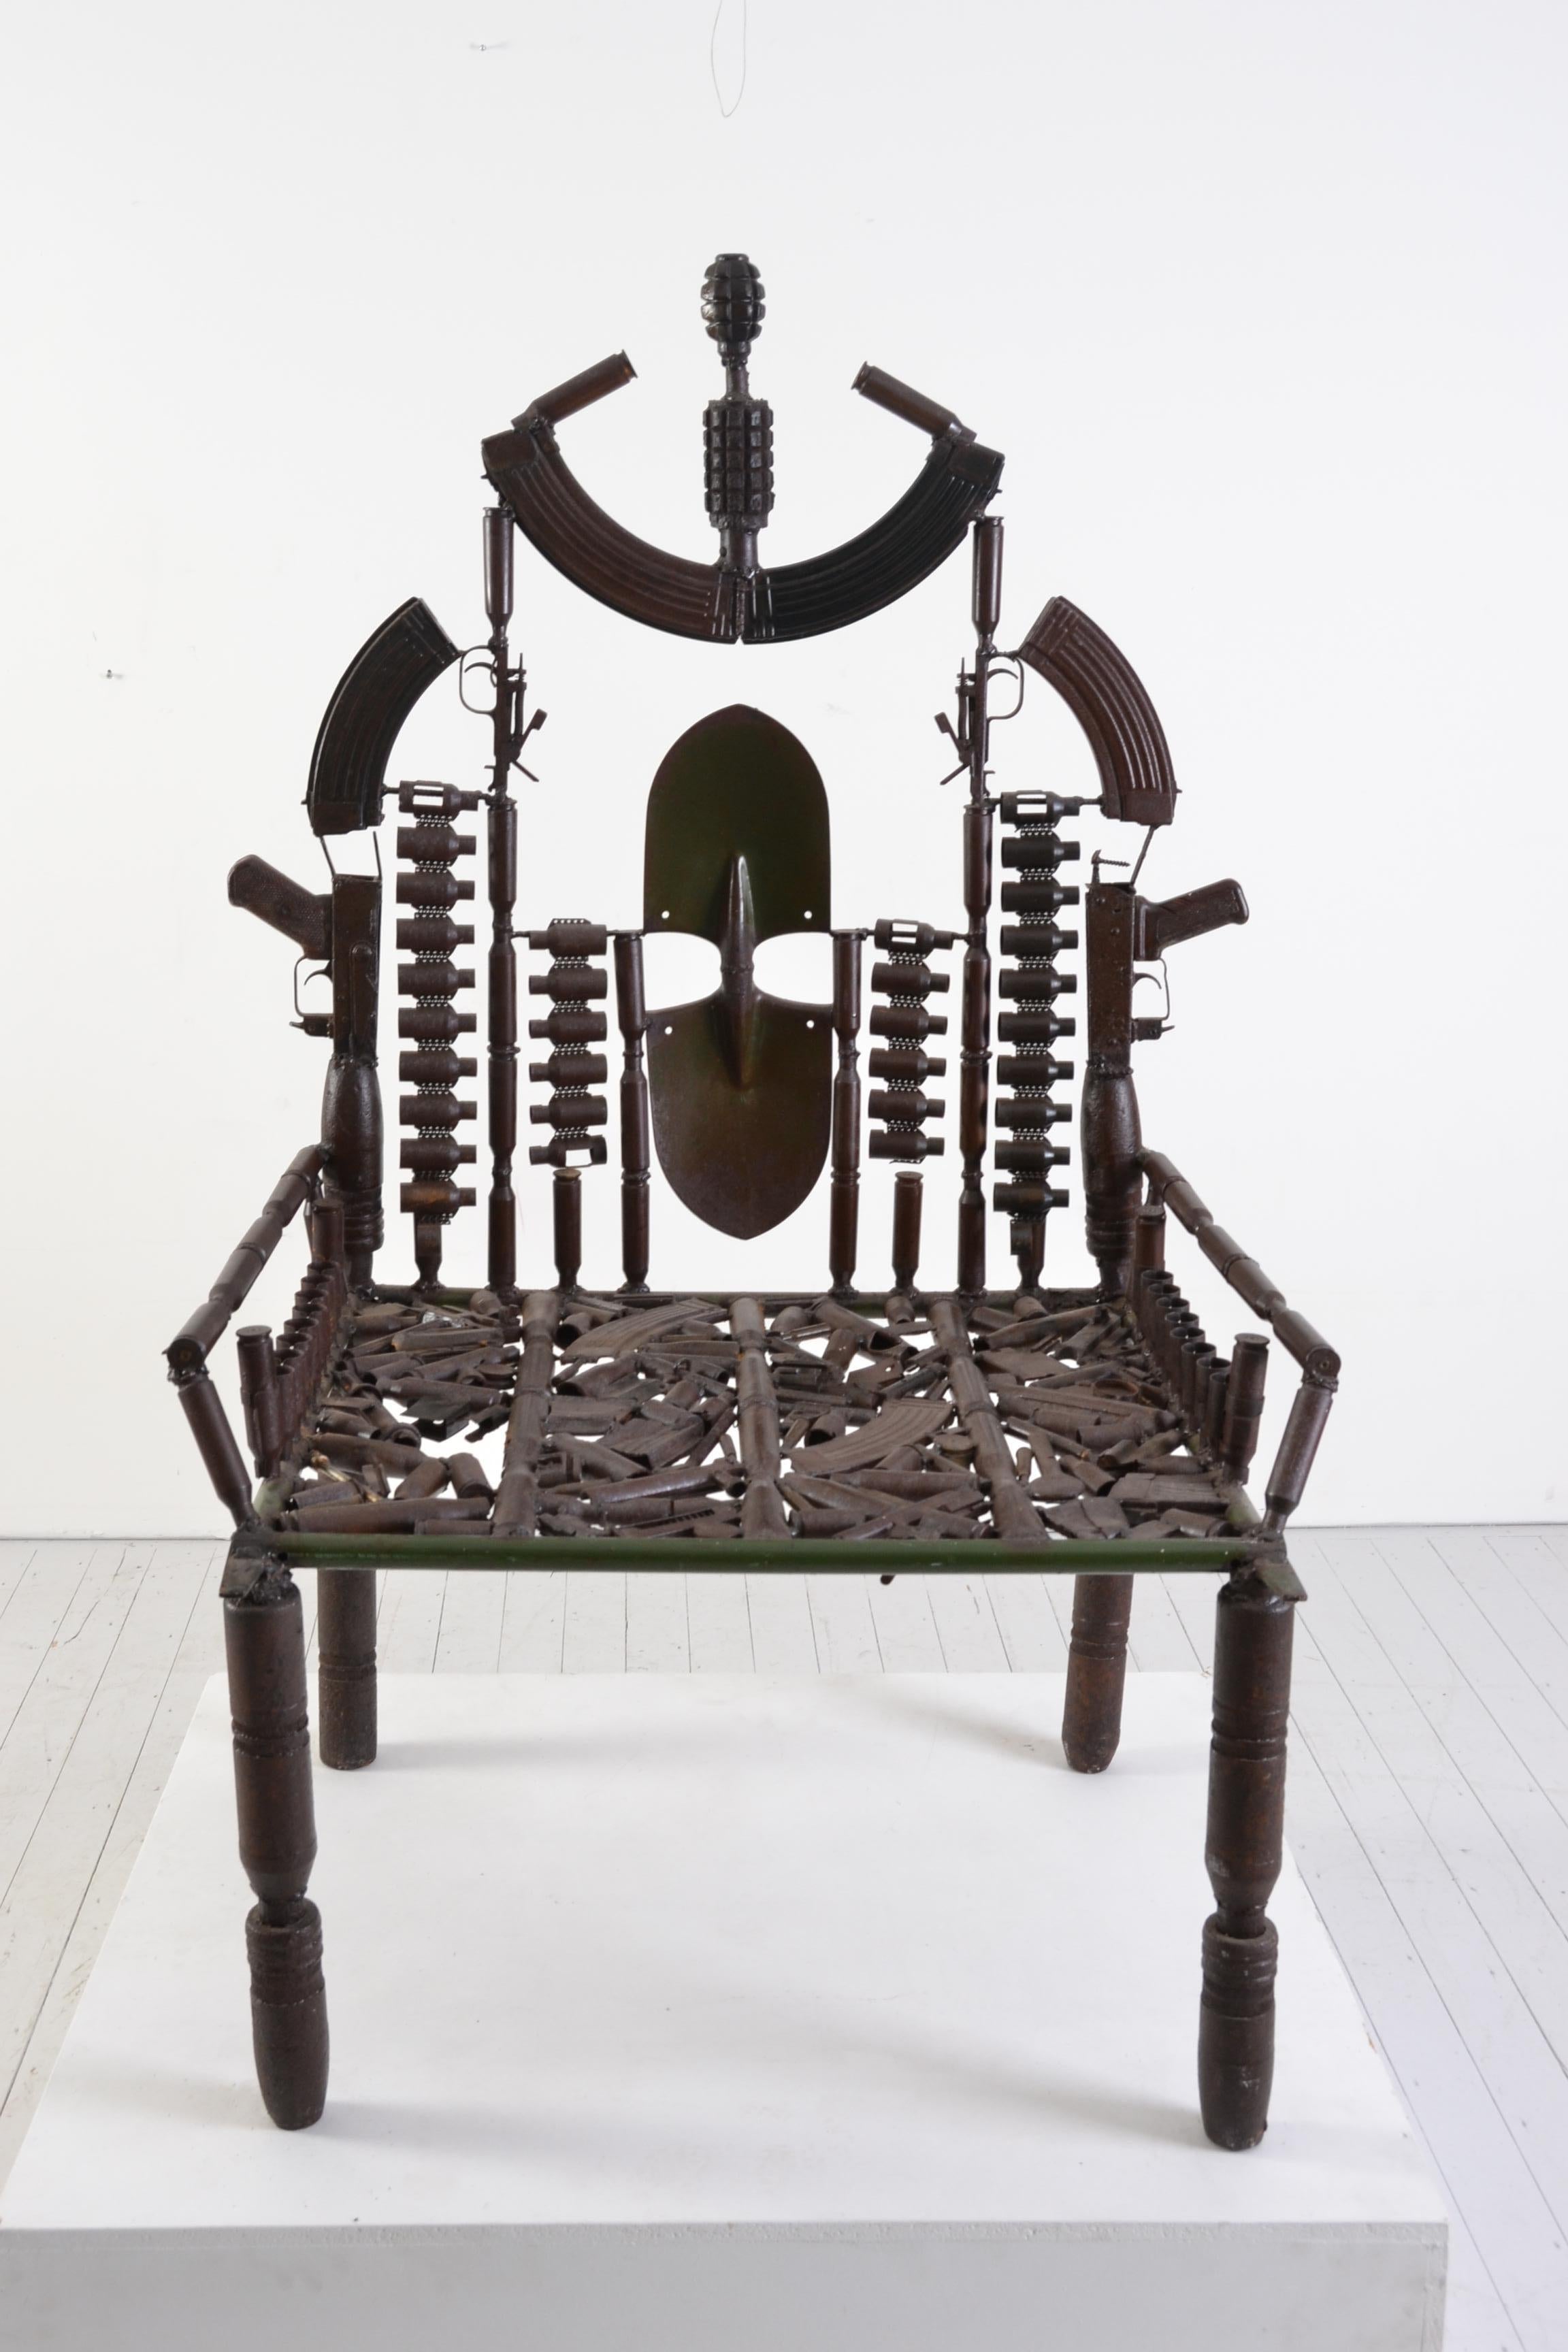 One of the first War- Thrones Goncalo Mabunda made from decommissed weapons.
His artworks are exhibtited all over the world.